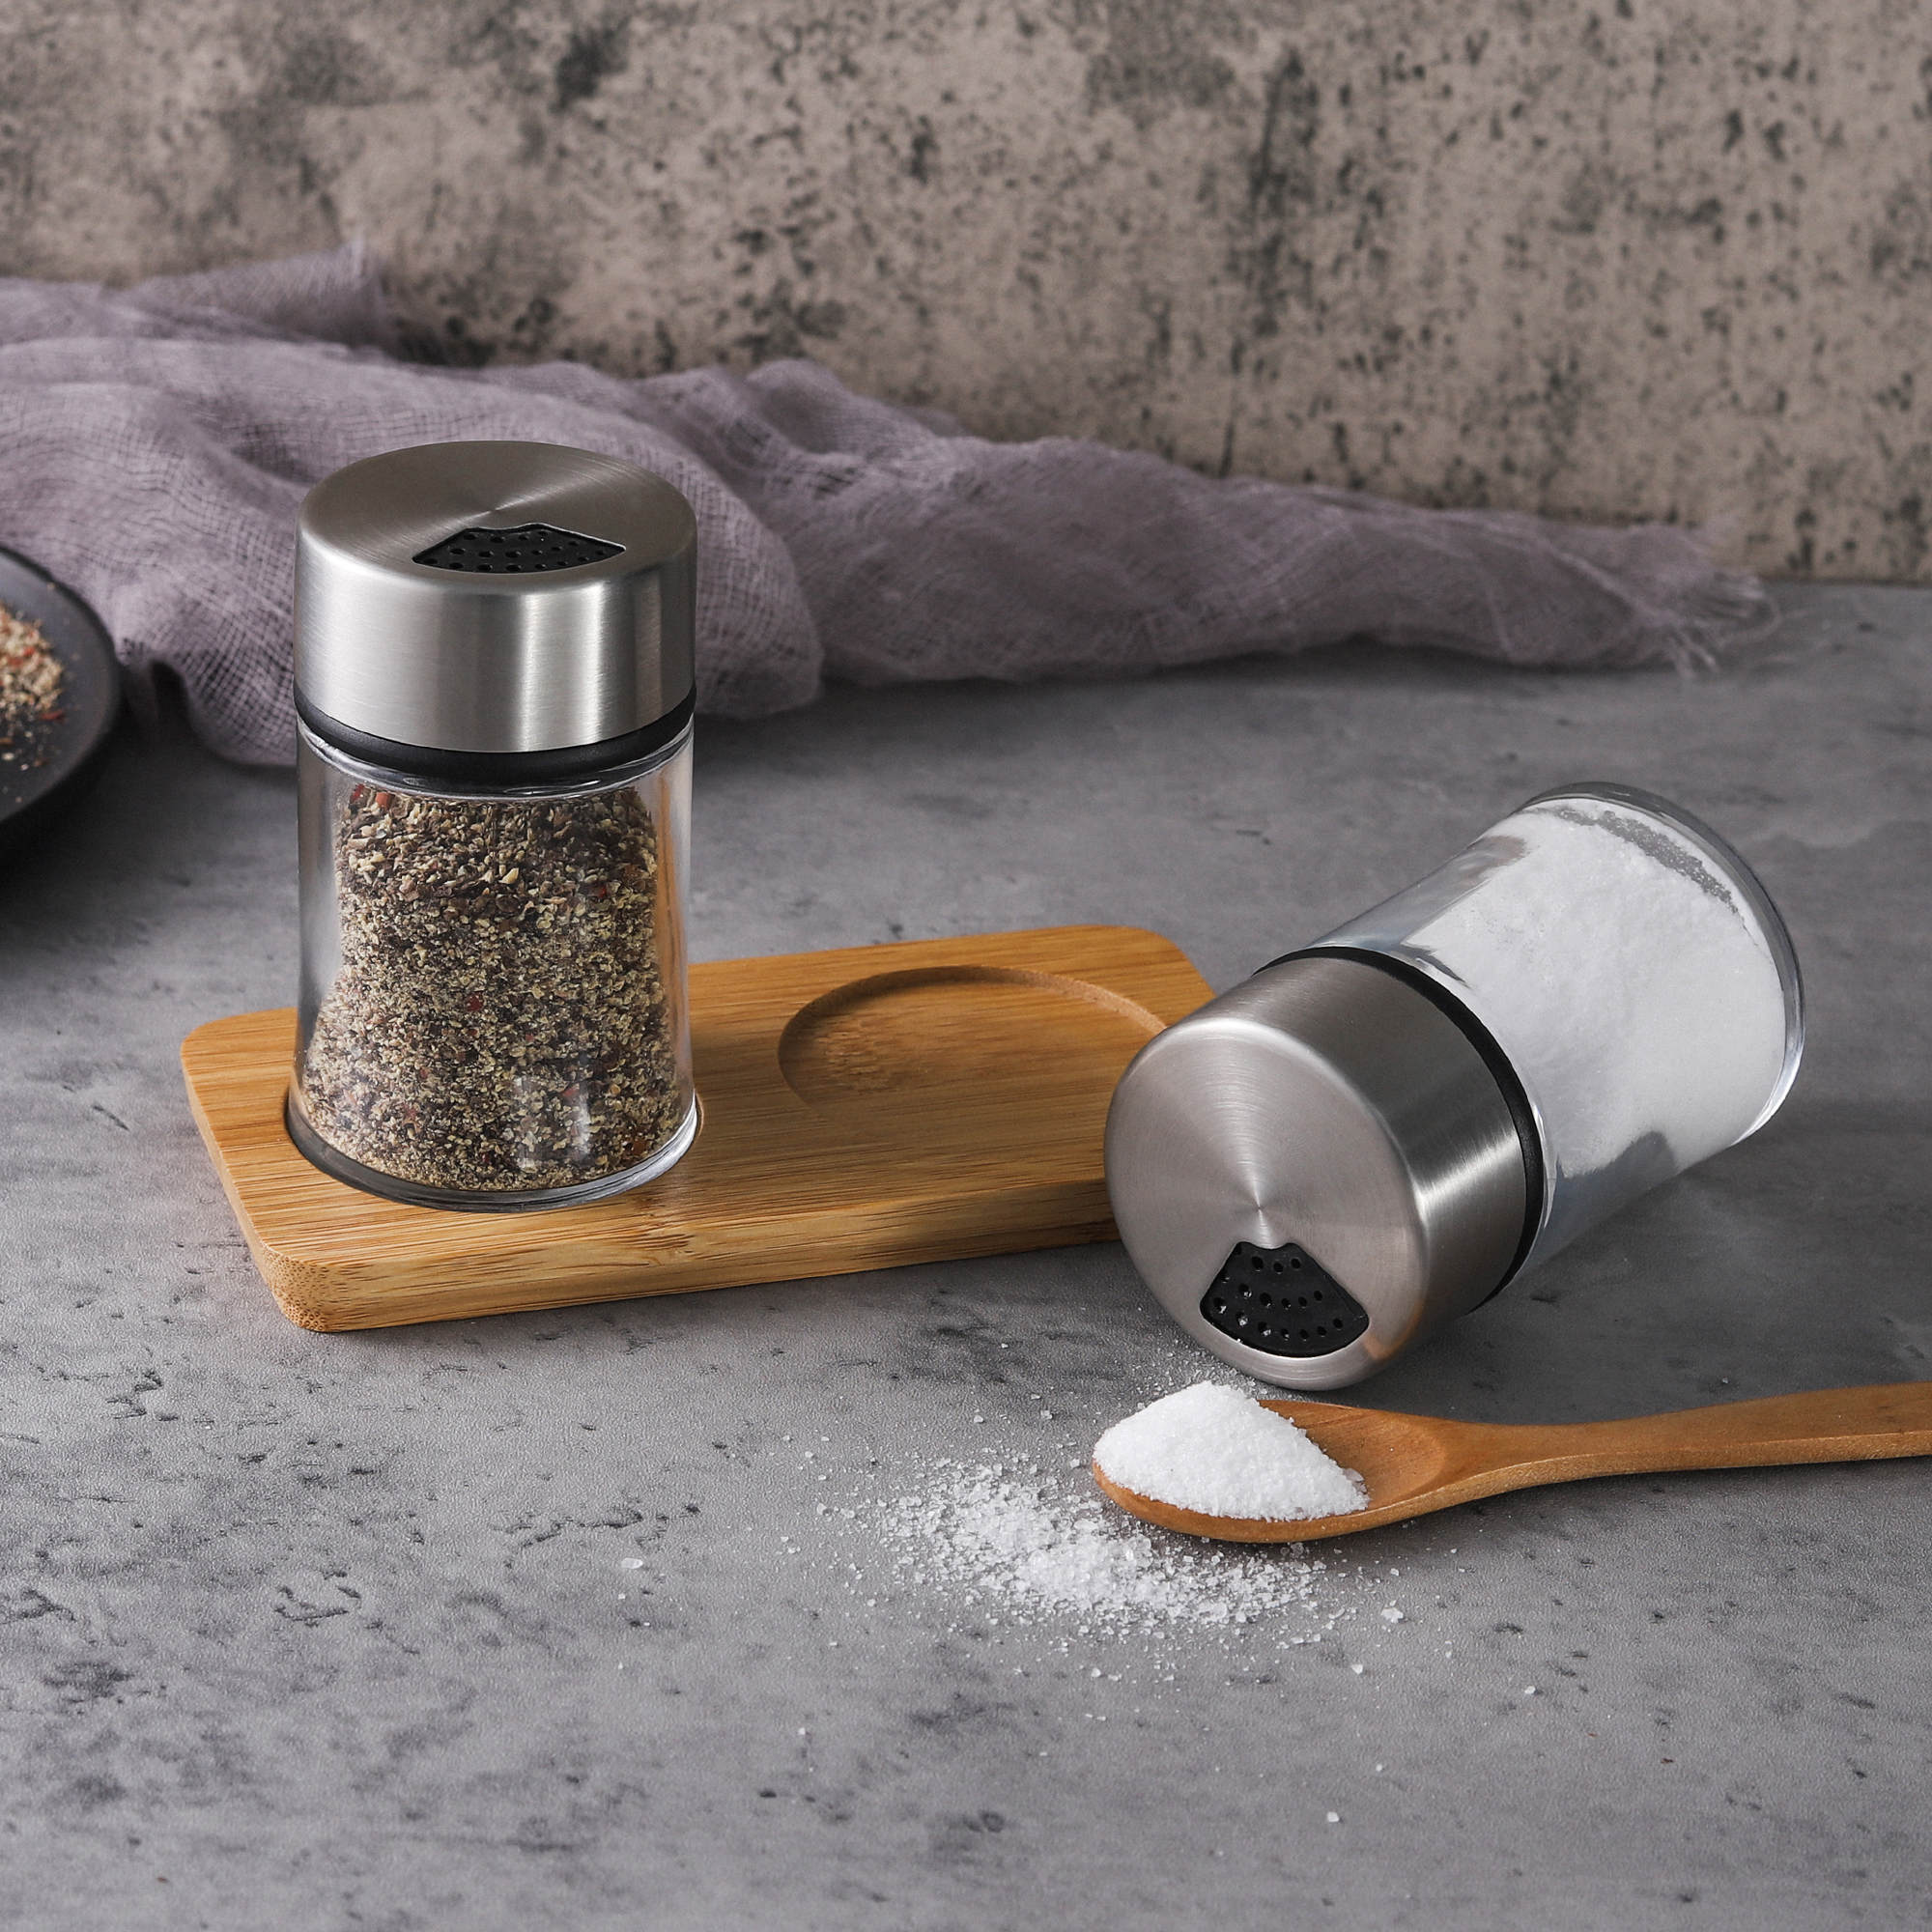 Premium Manual Glass Spice Grinder Mill - Grind Your Spices to Perfection